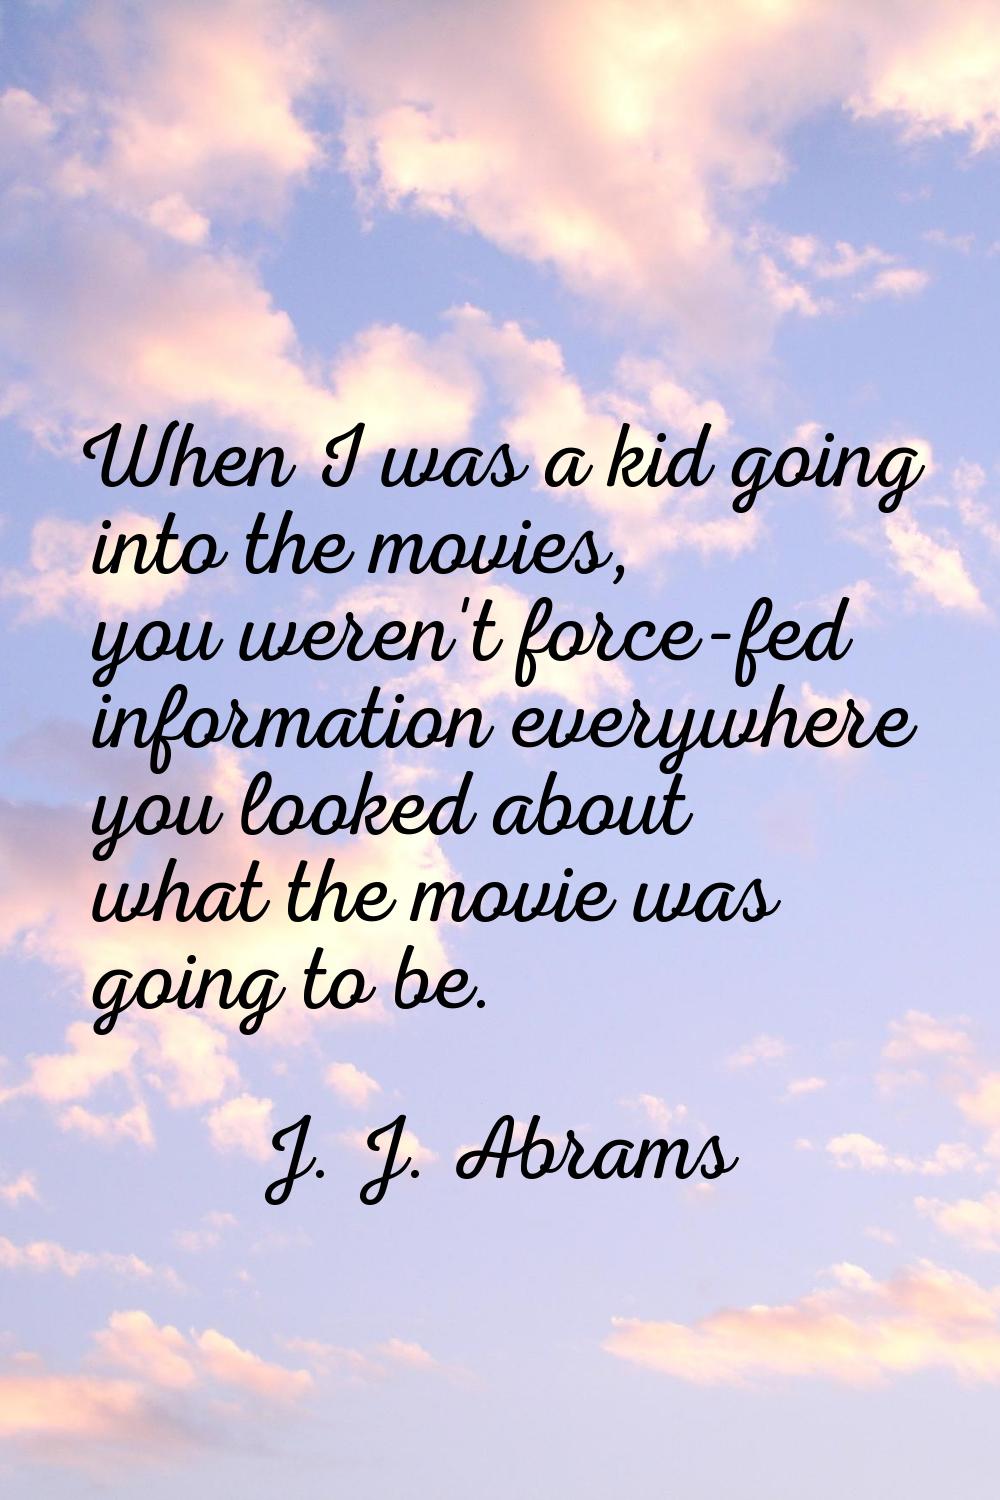 When I was a kid going into the movies, you weren't force-fed information everywhere you looked abo